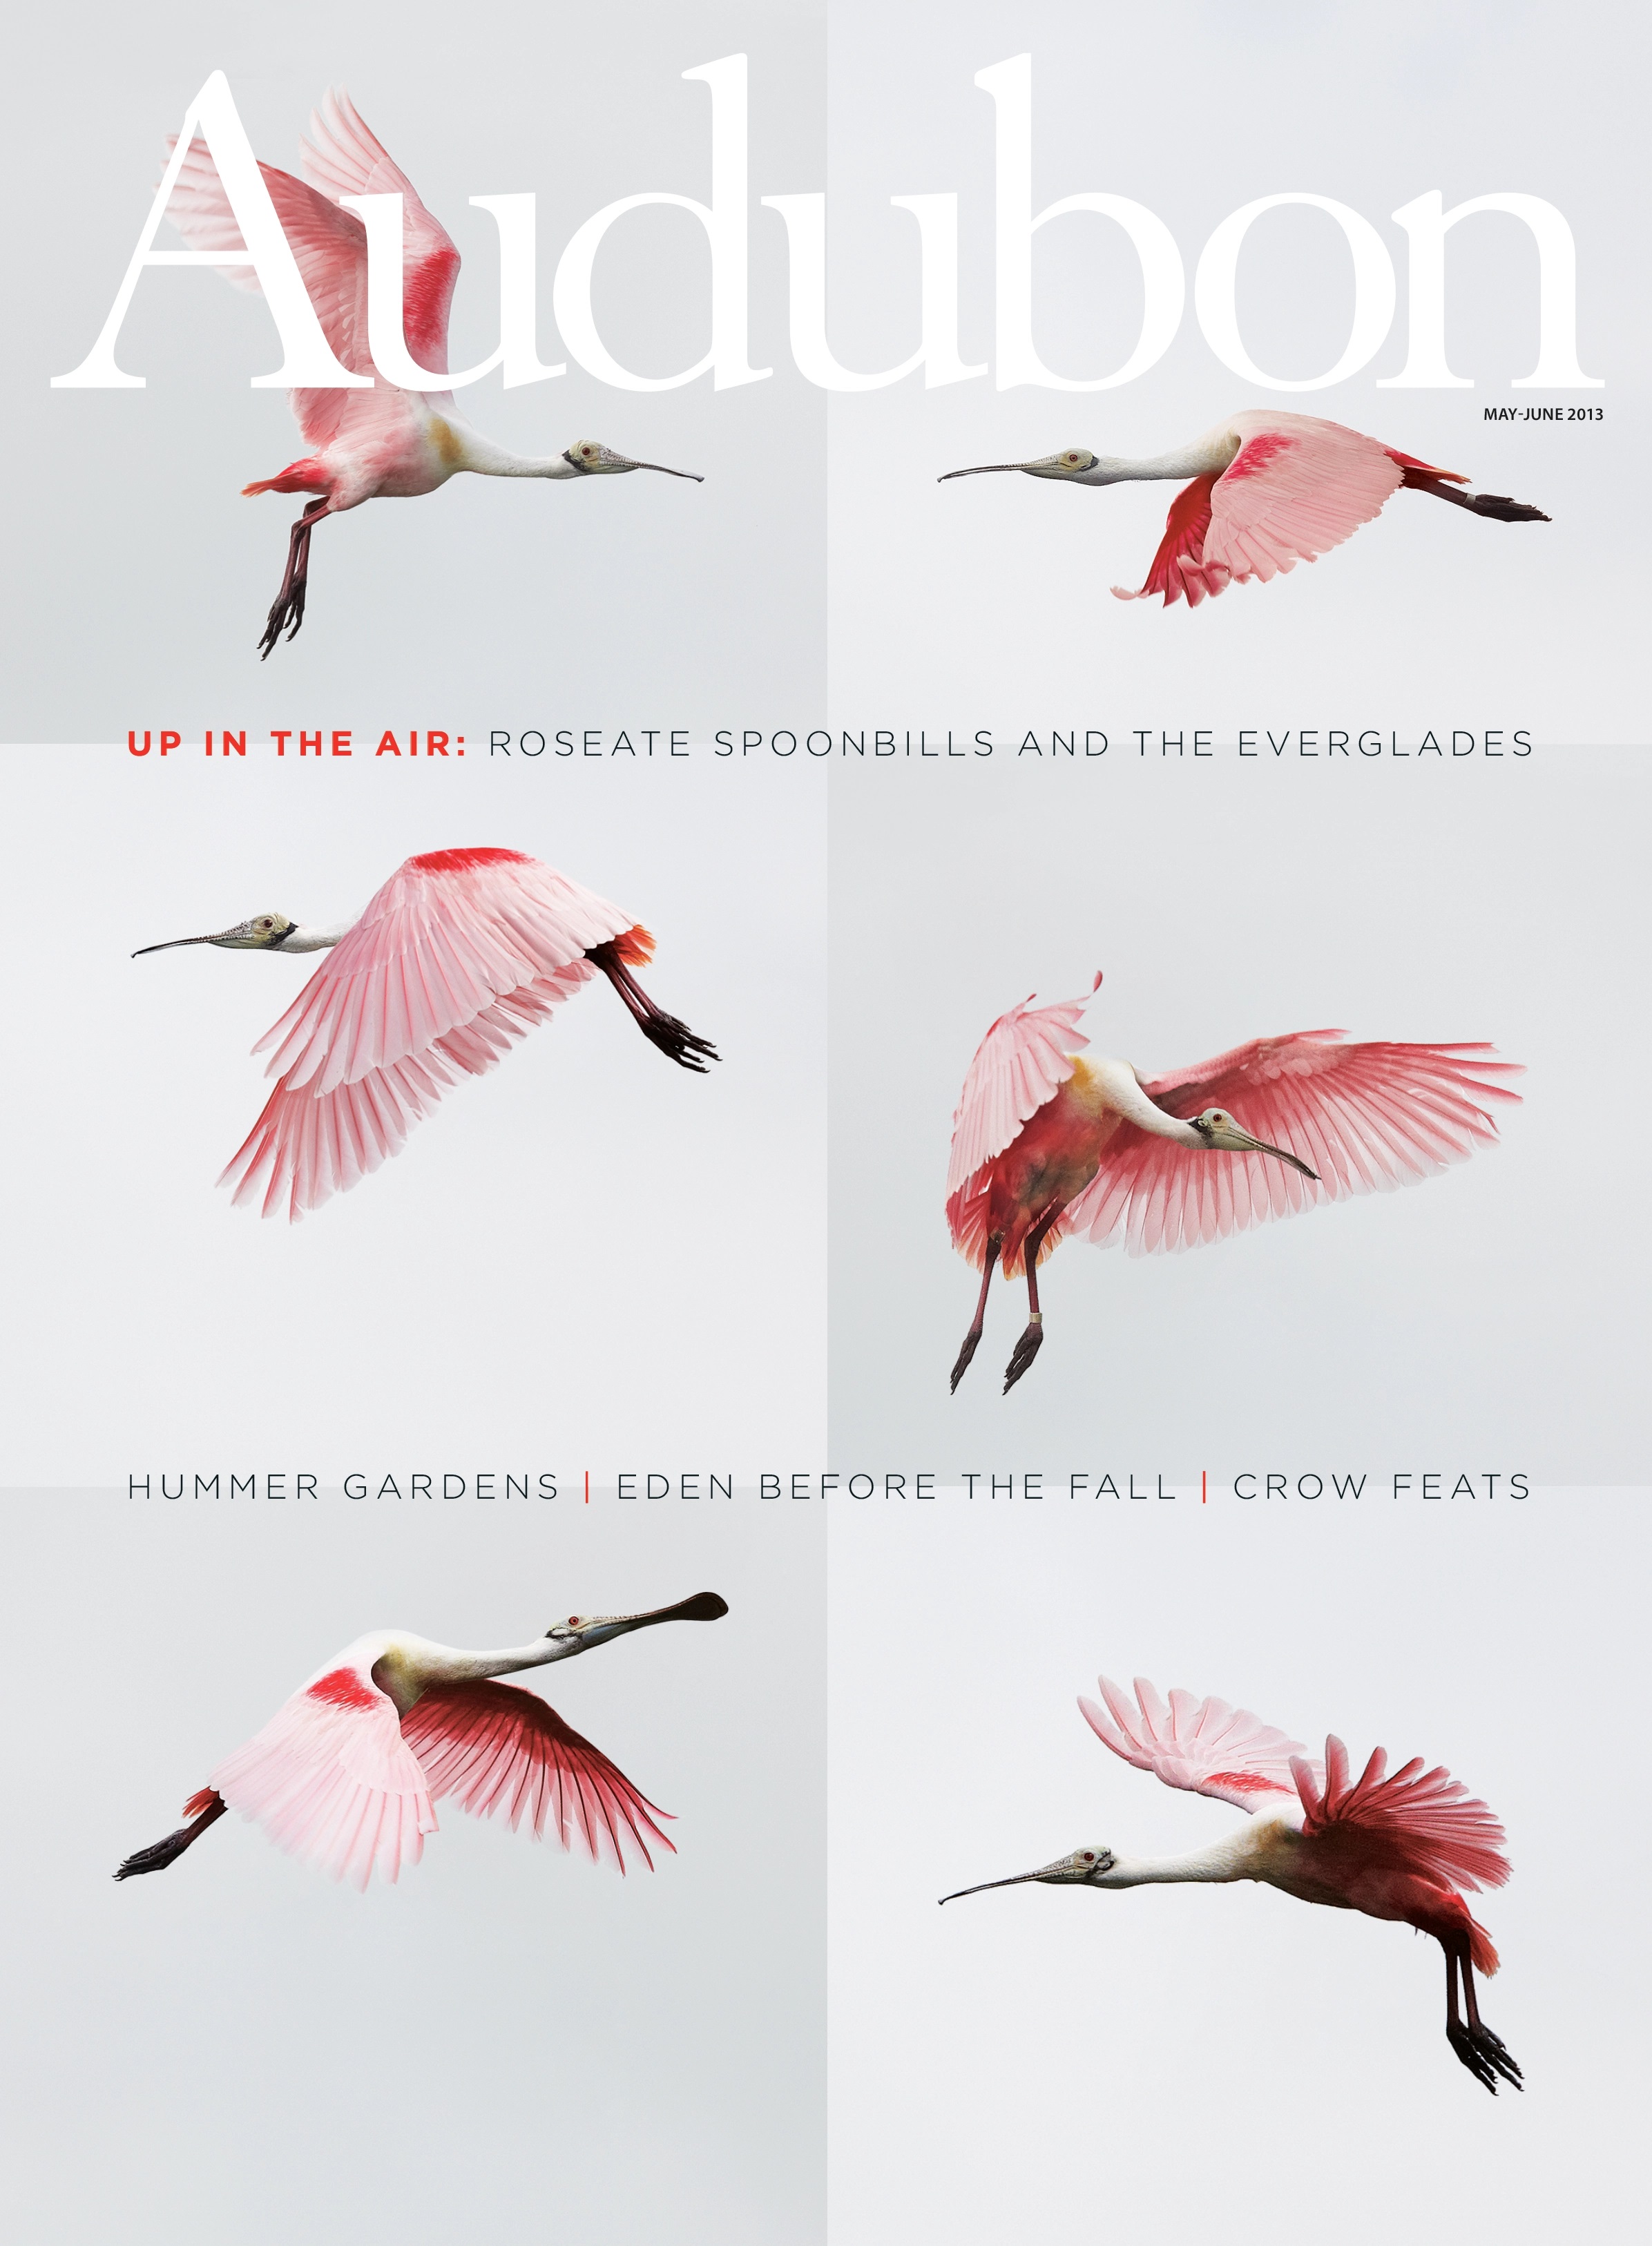 Audubon-May–June, "Up in the Air"